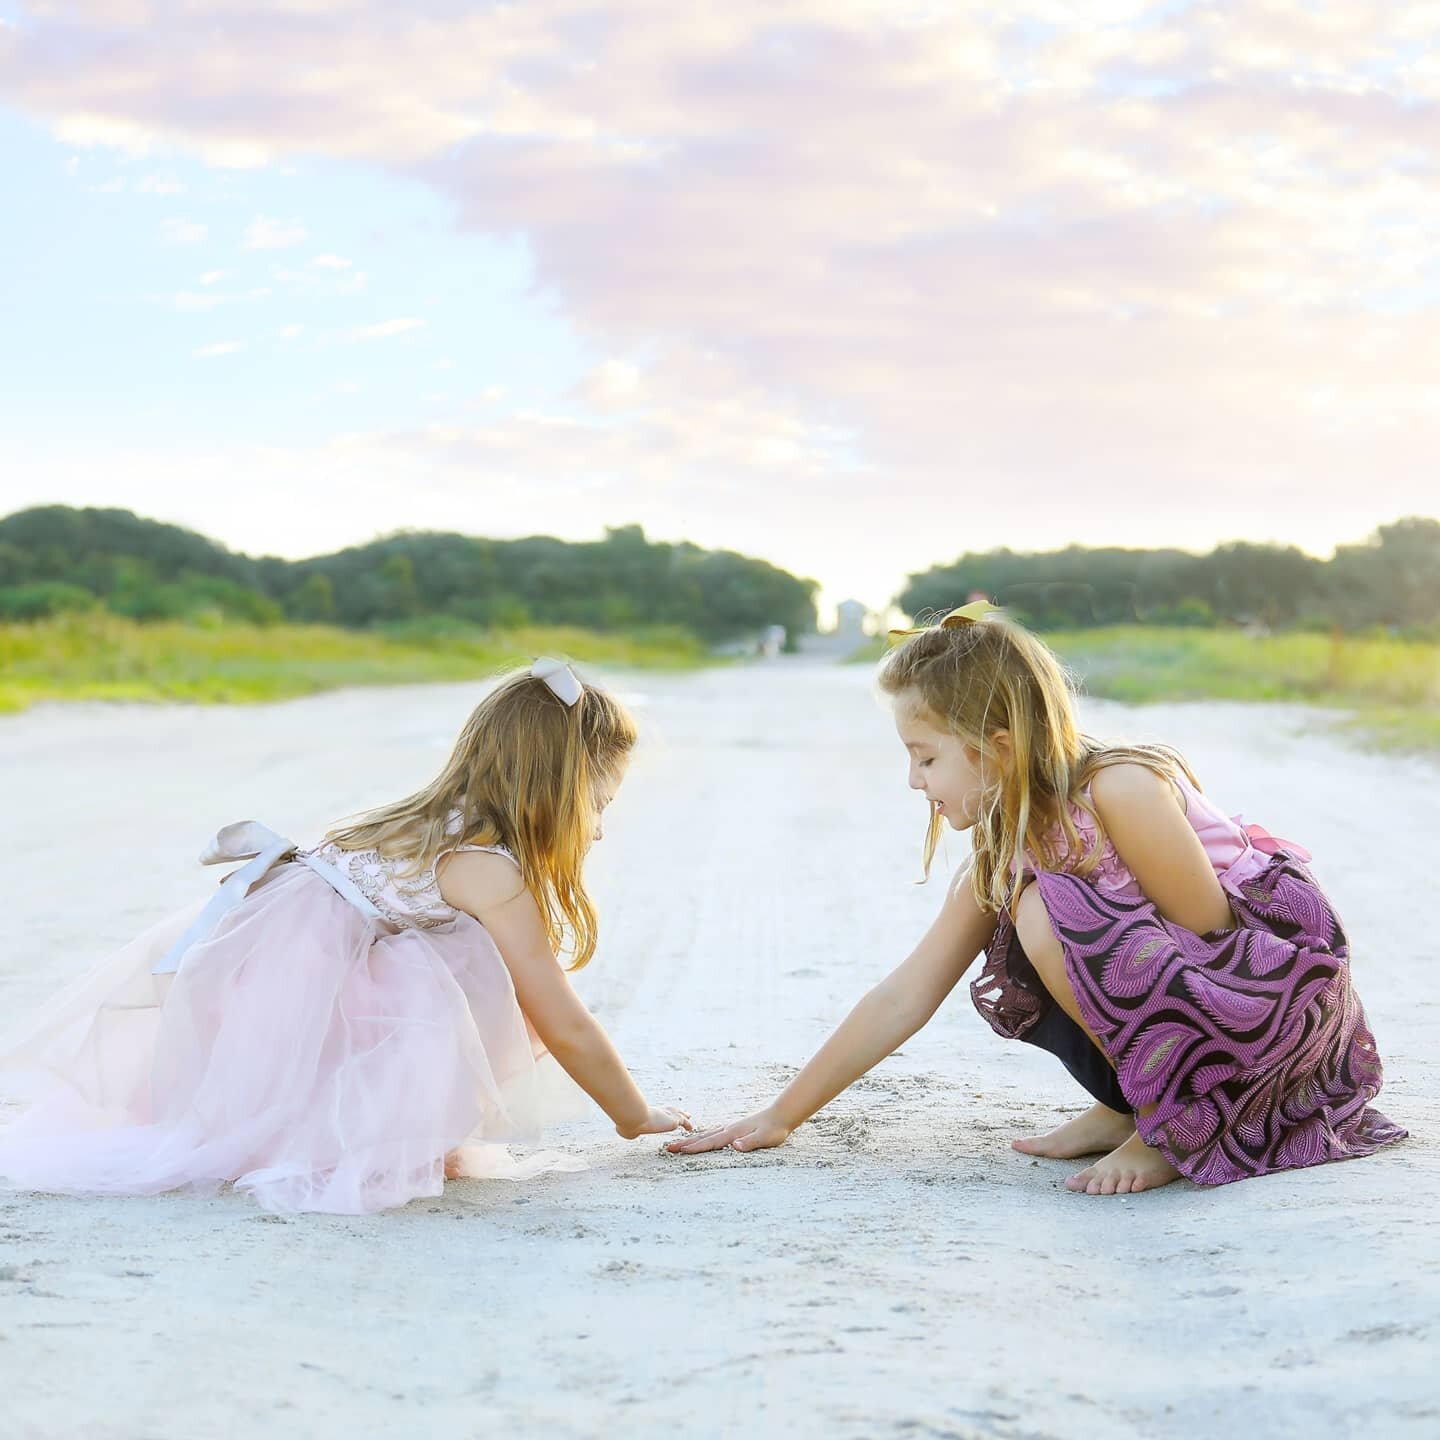 Nothing like a sister to dance with you at sunrise 🌅
.
.
.
#sistersister #sistersforlife #gtmreserve #sunrisephotoshoot #sunrisephotos #familyphotoshoot #familyphotographer #floridaphotographer #floridafamilyphotographer #childphotographer #sweetsmi